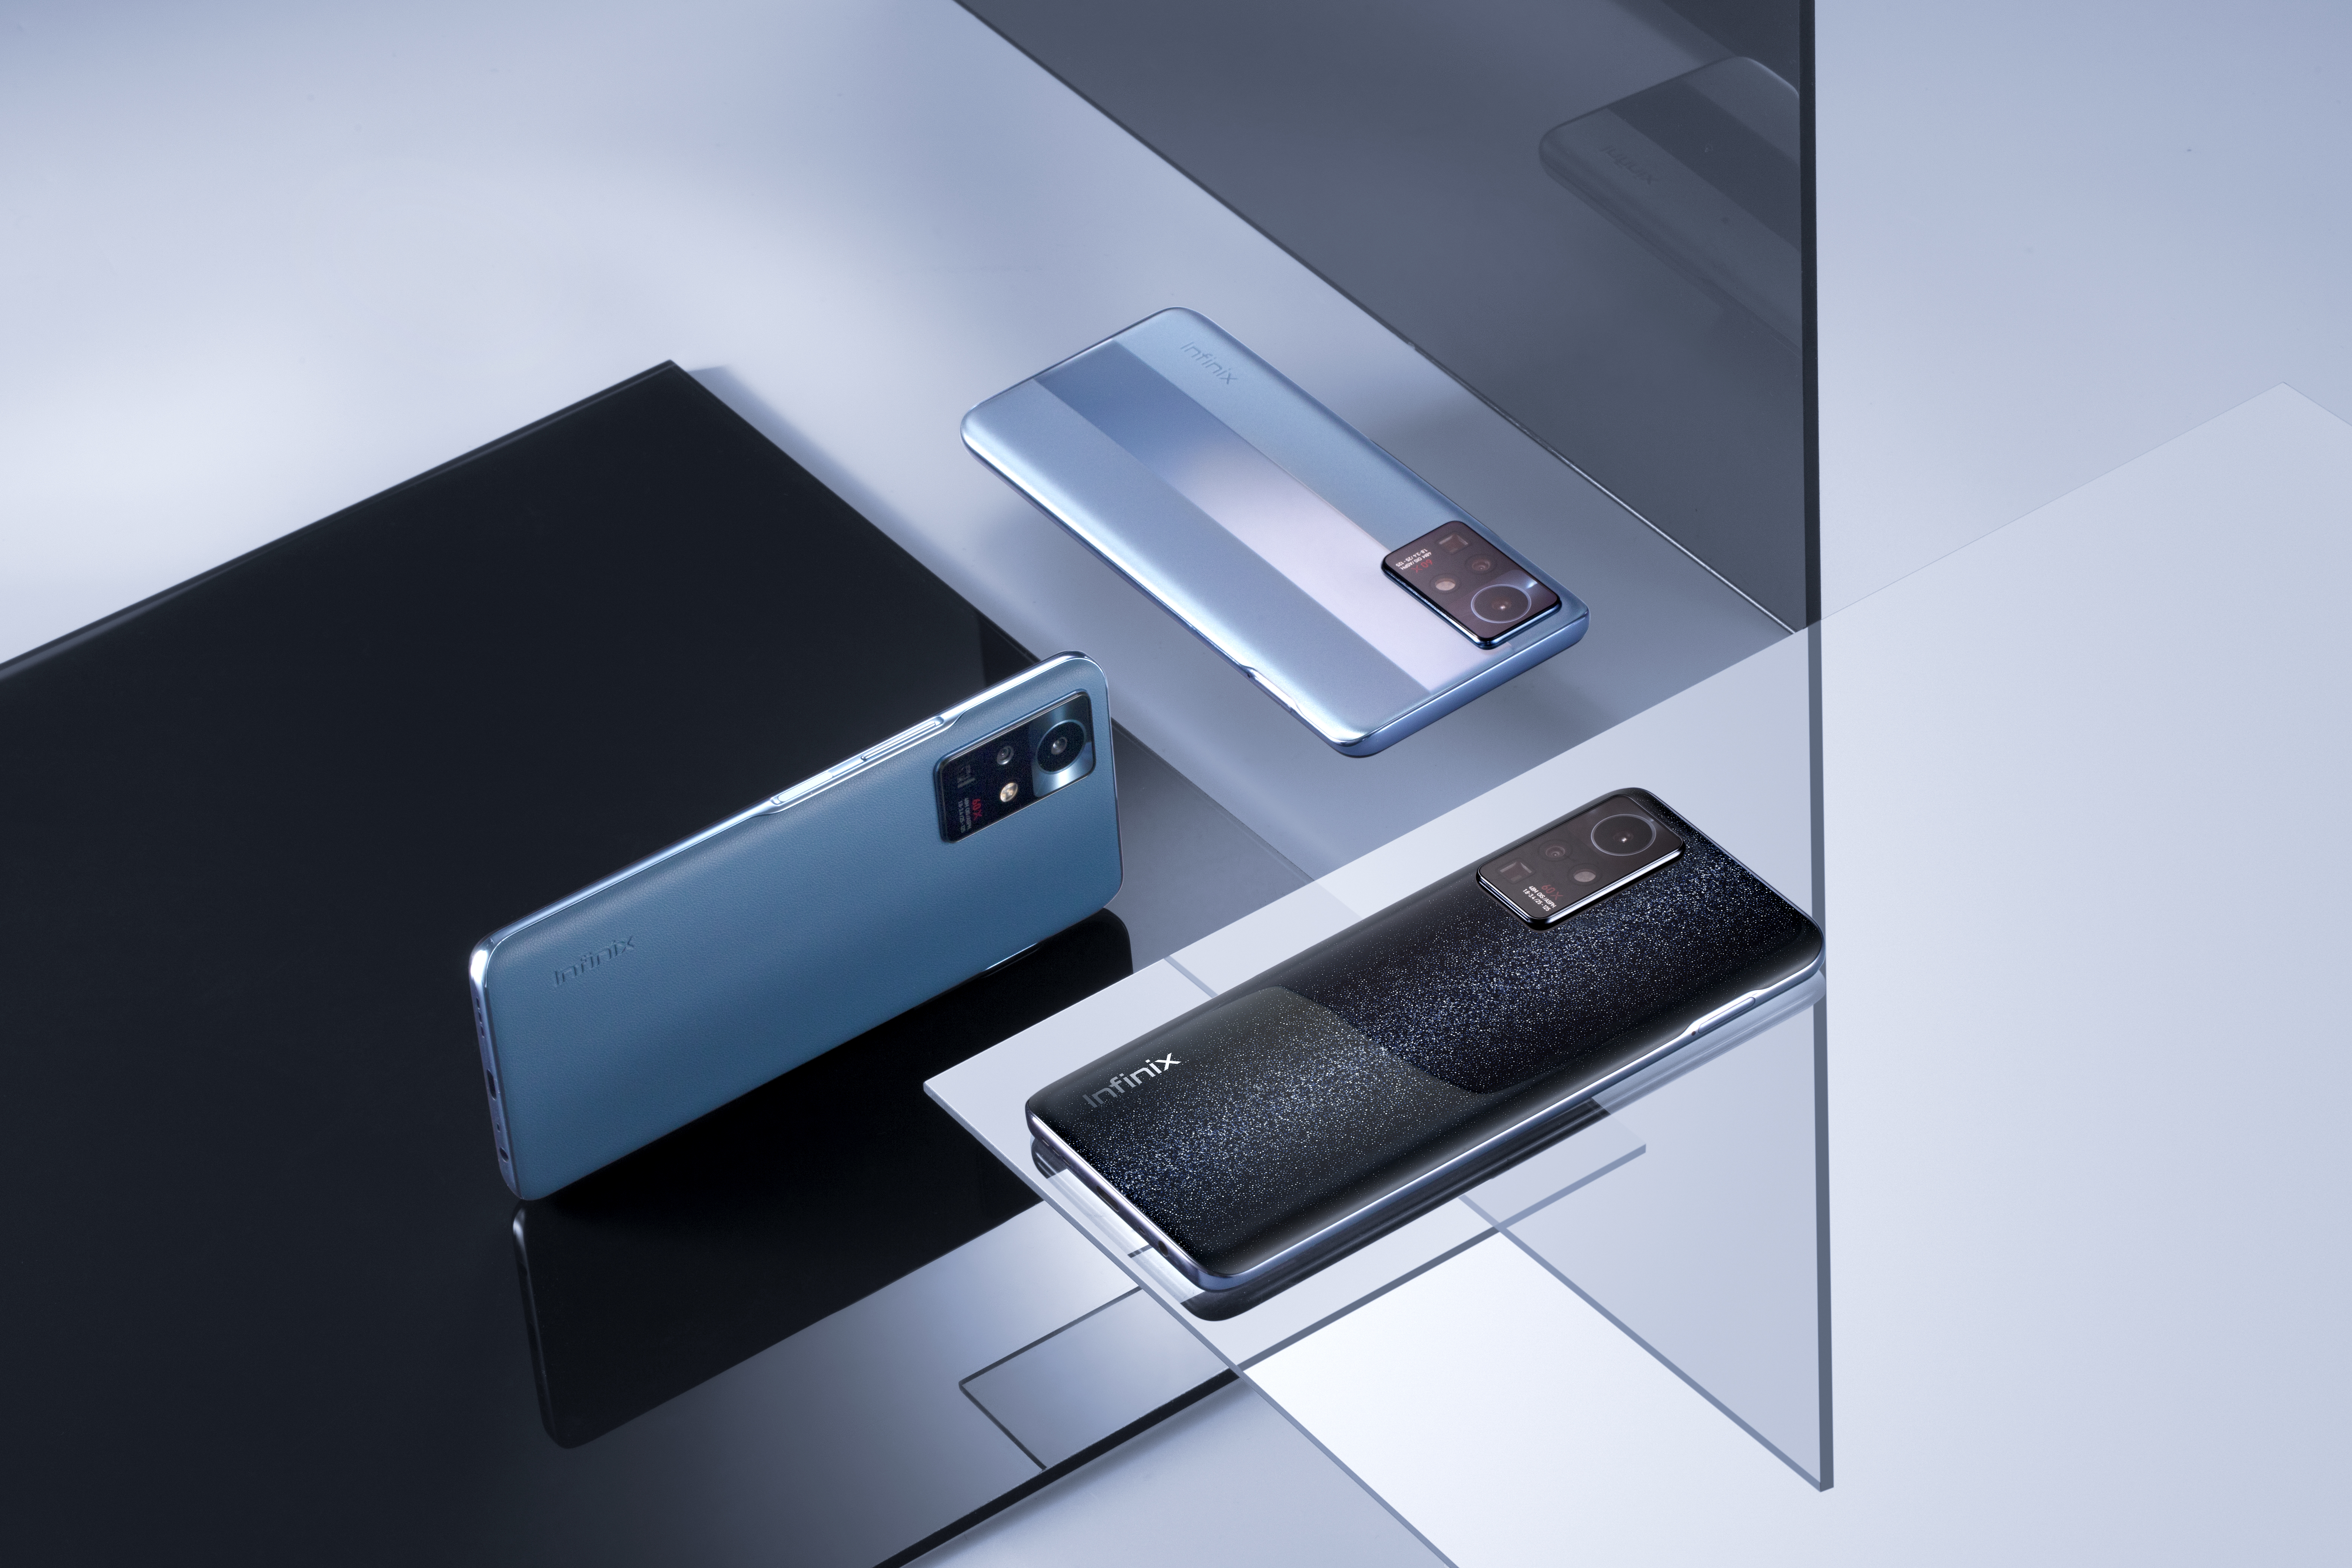 Infinix zero x neo comes in 3 finishes, nebula black, starry silver and bahamas blue. The price starts at rm899.